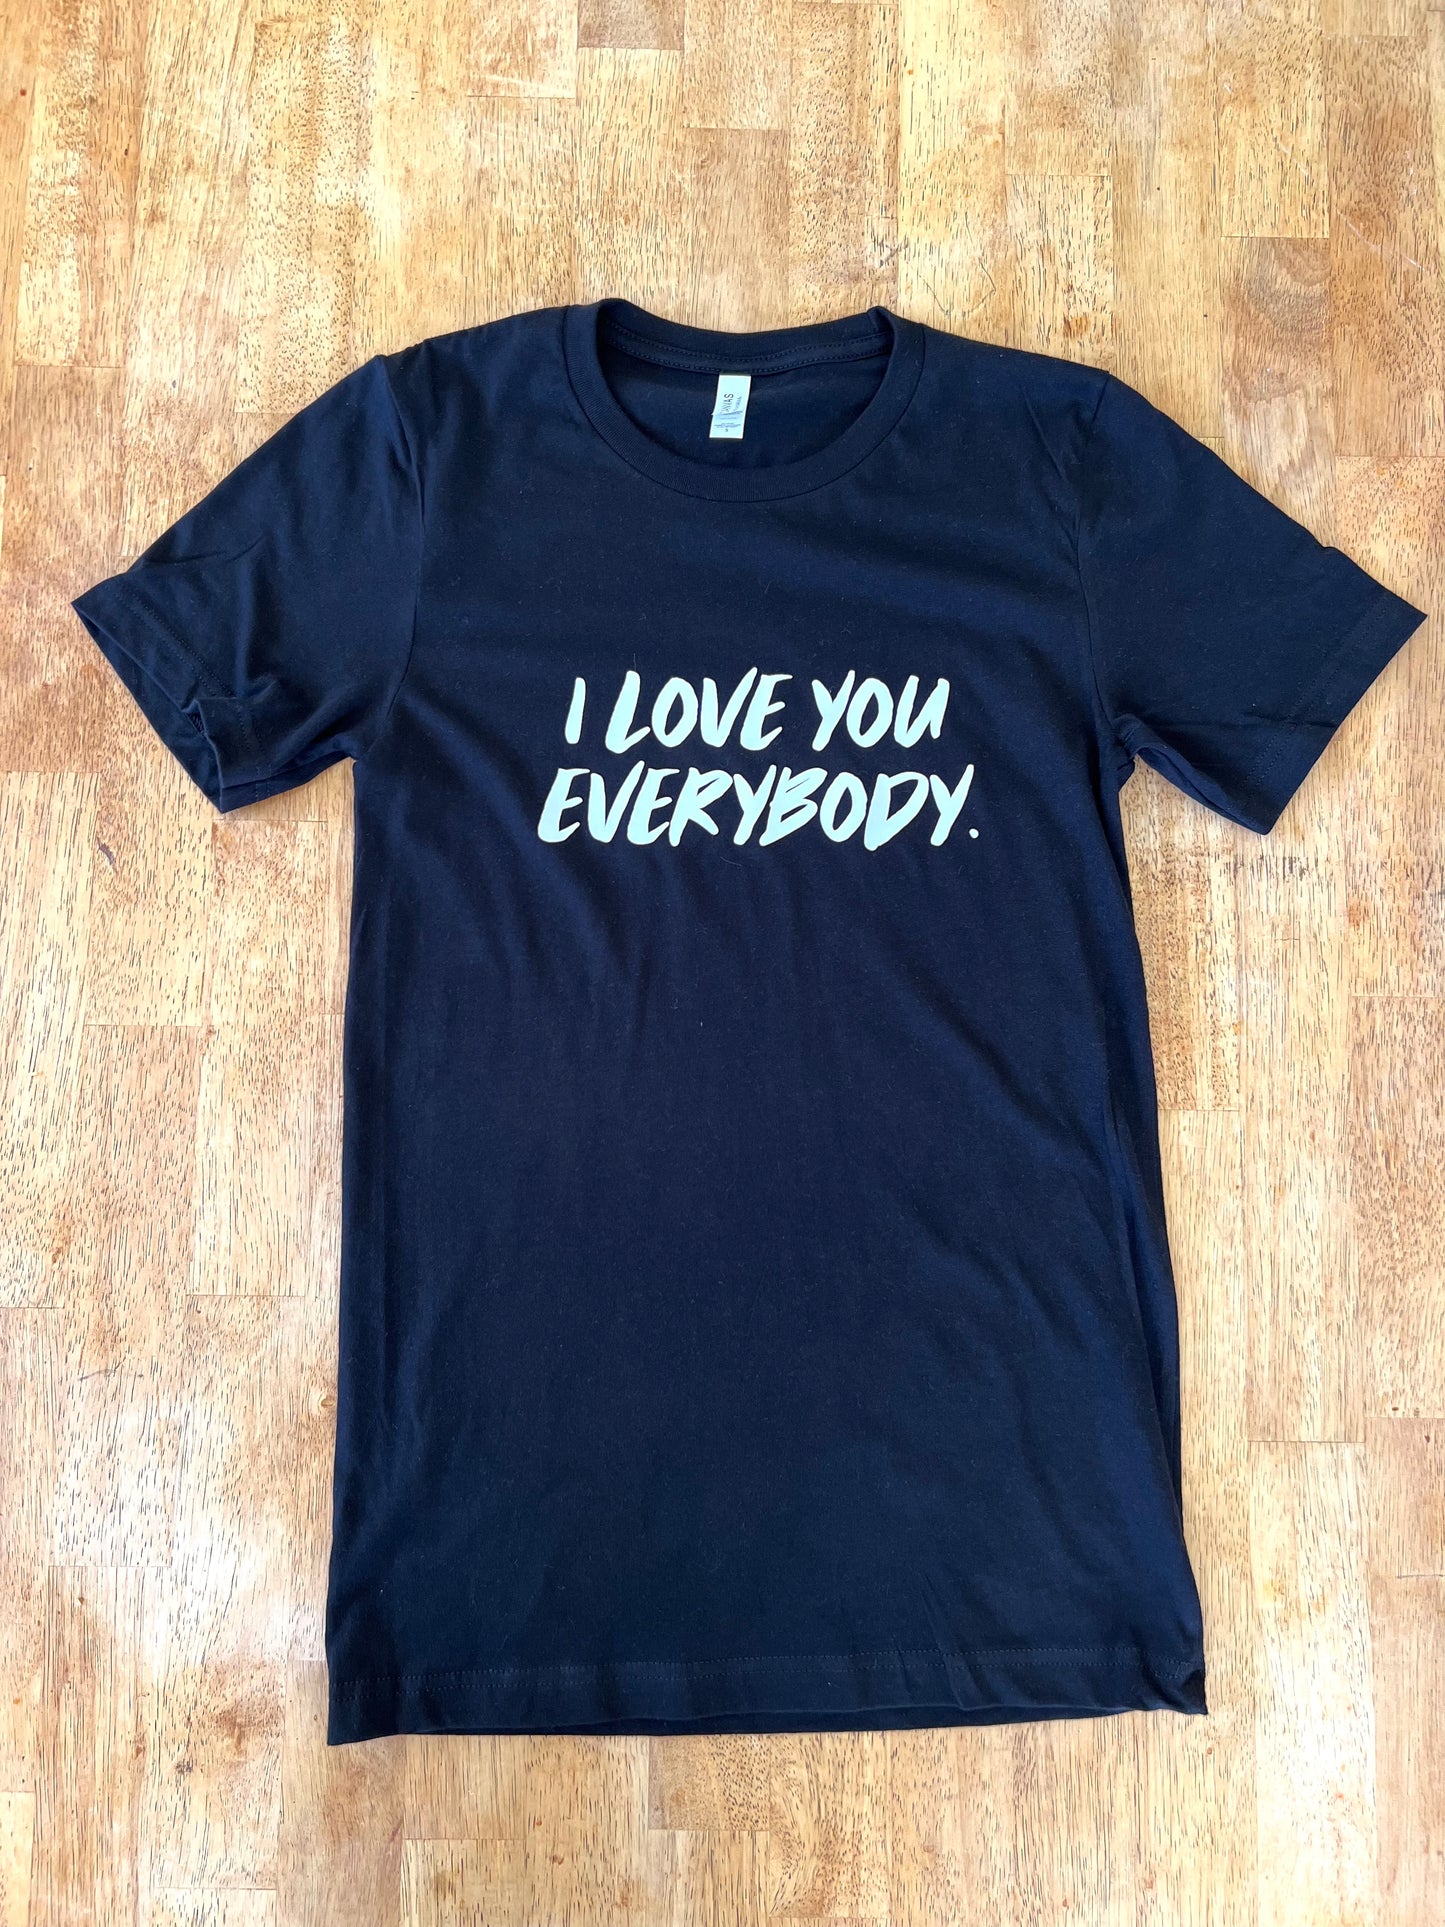 I Love You Everybody. T-shirt